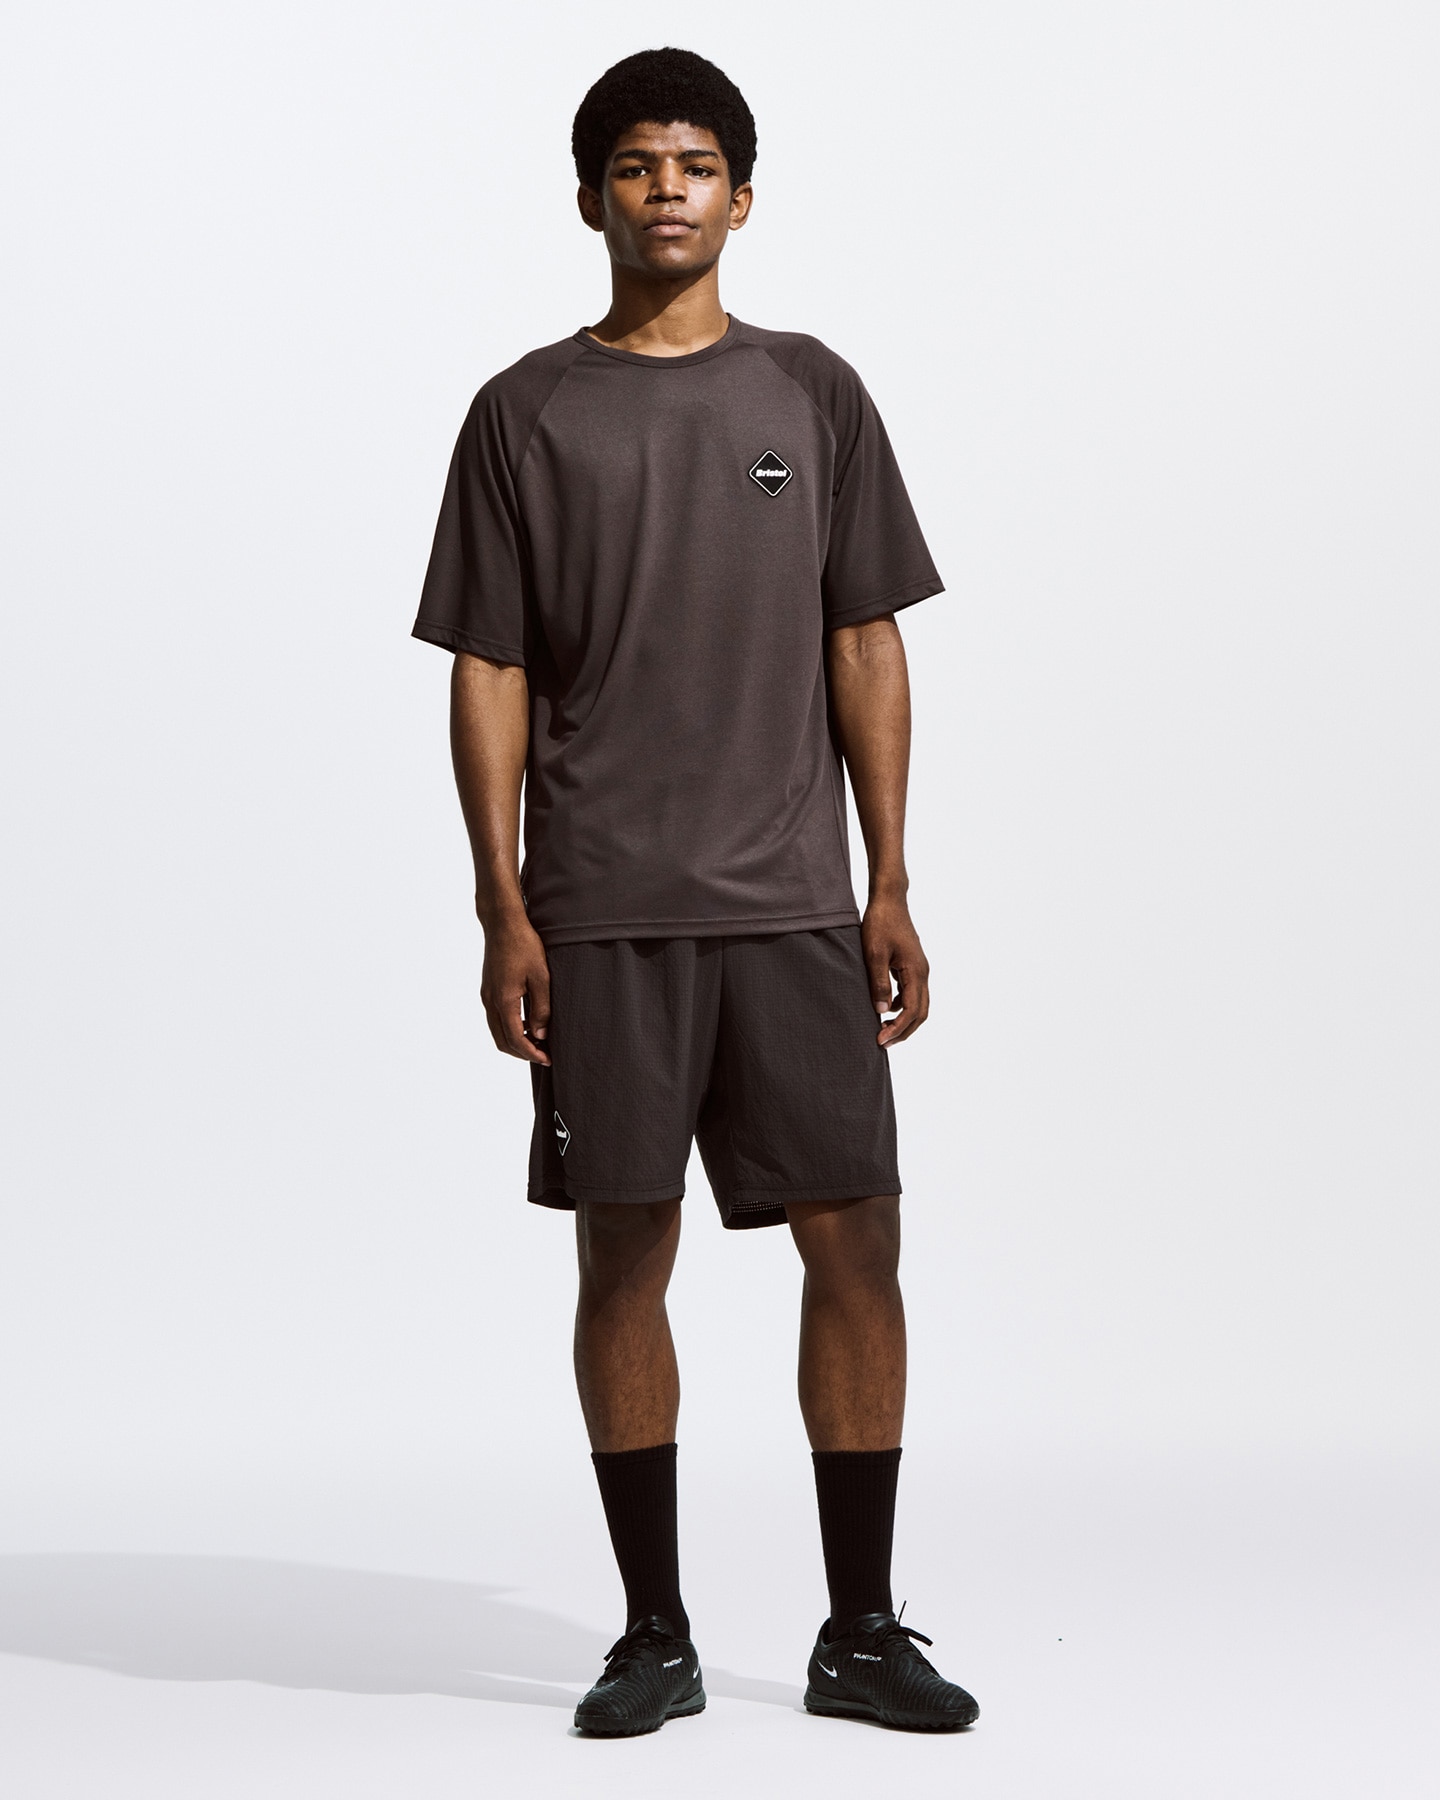 SOPH. | S/S TRAINING TOP & SHORTS(S BROWN):